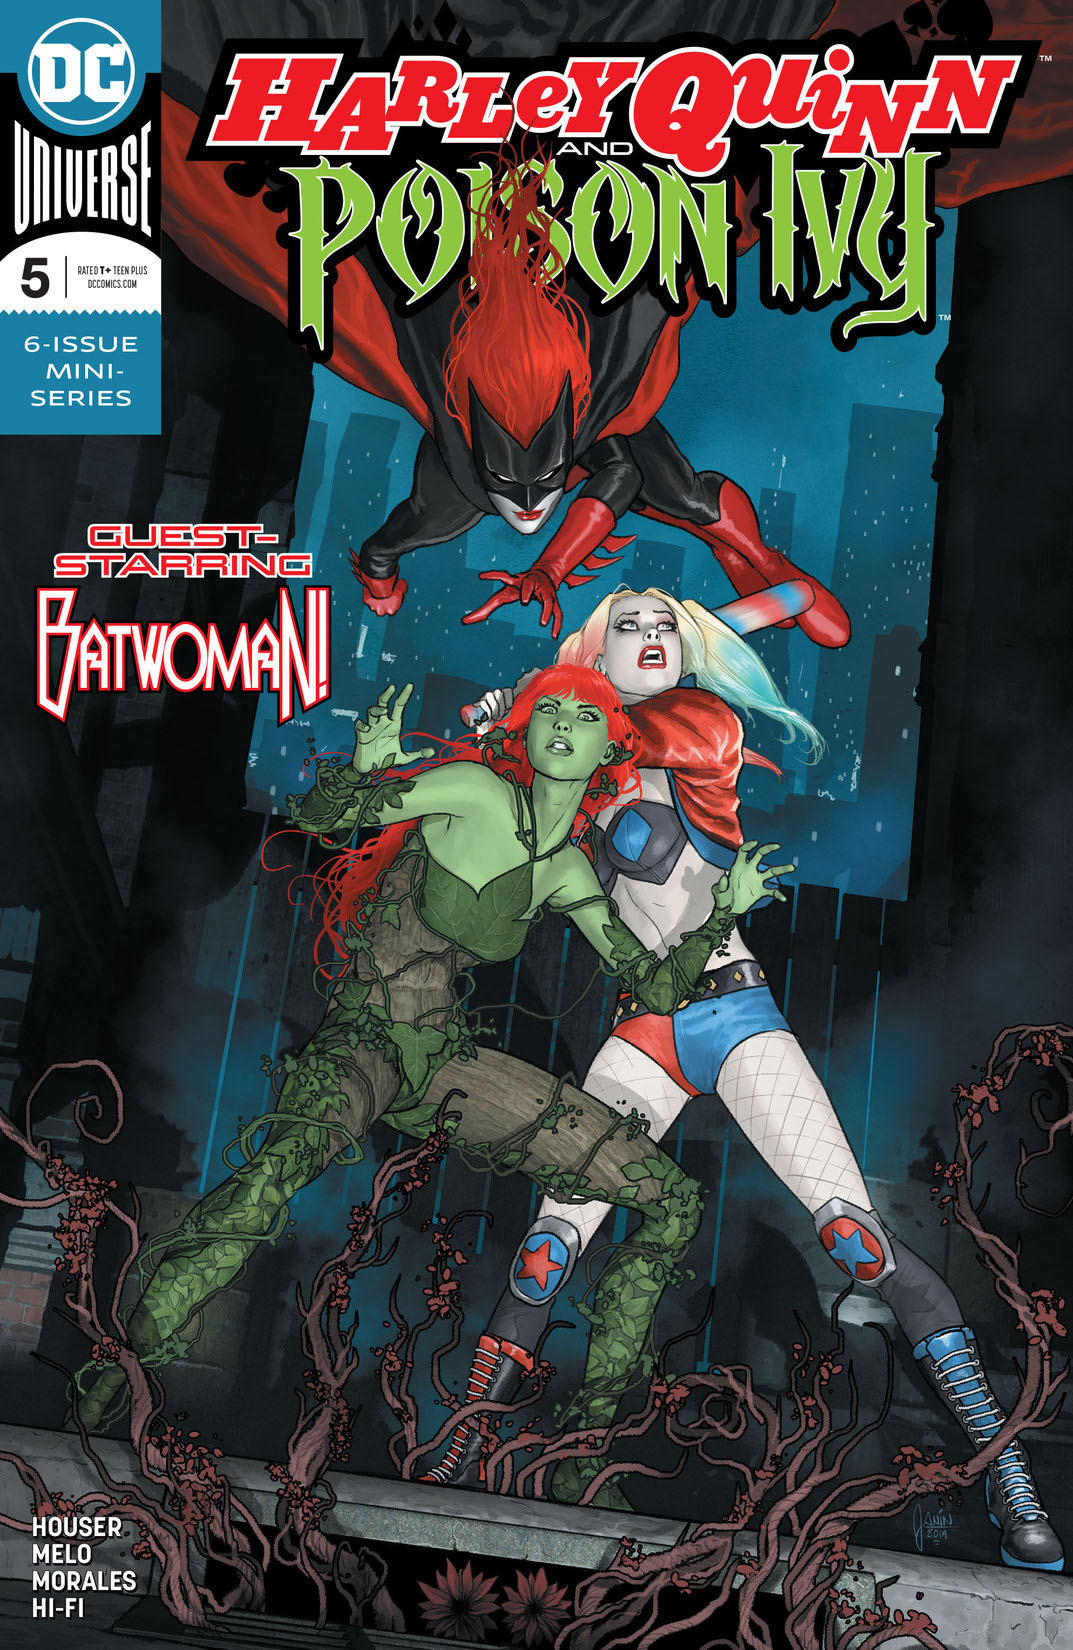 Harley Quinn & Poison Ivy #5 preview images